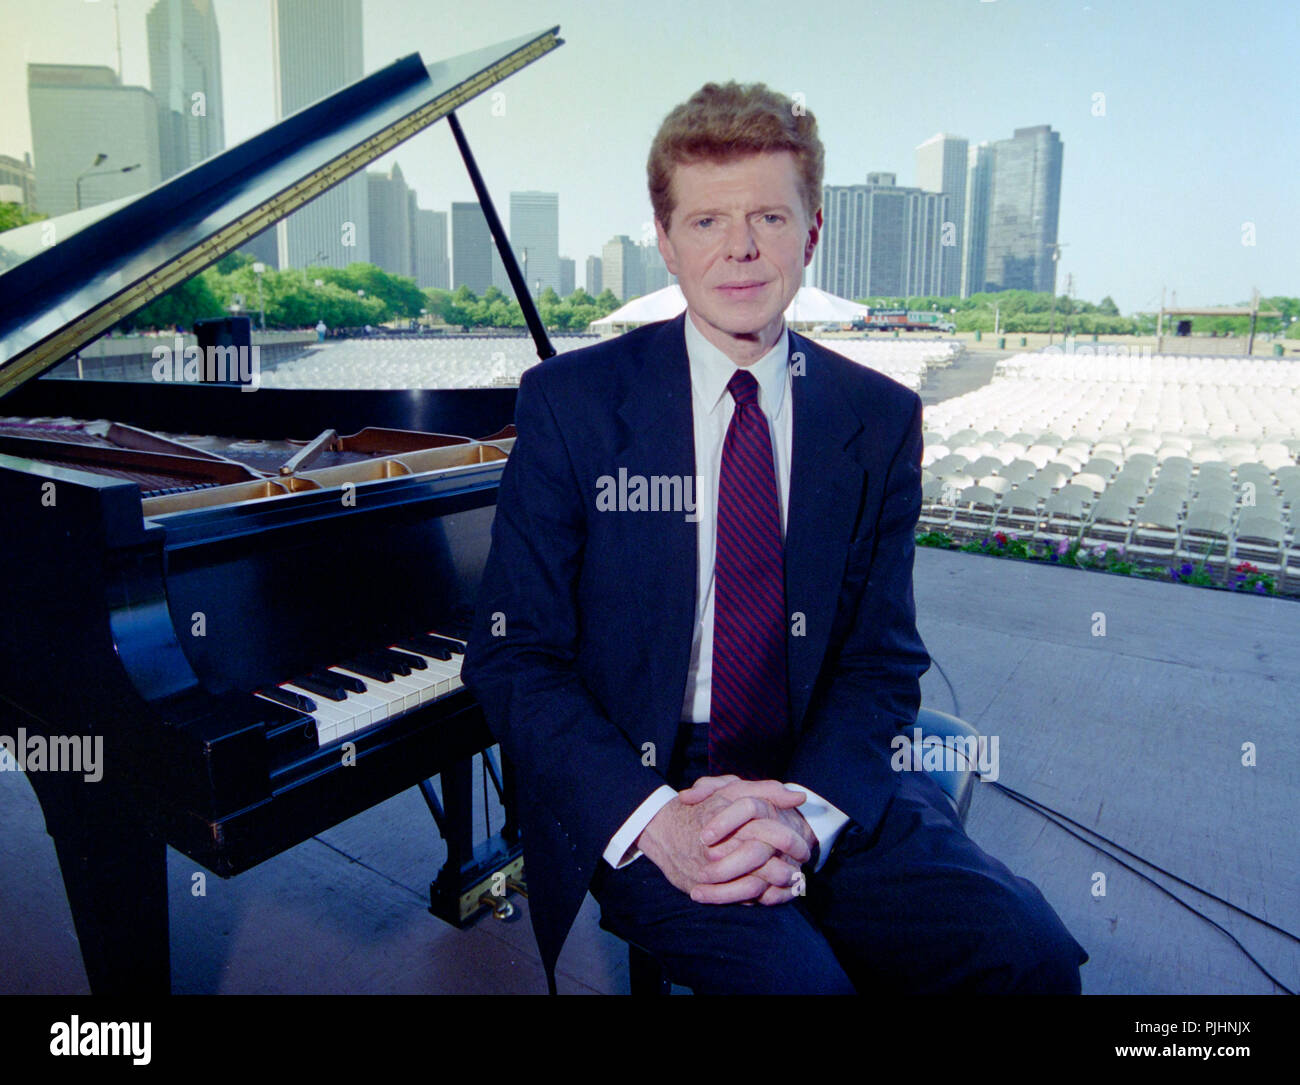 Pianist Van Cliburn poses with his piano in the Petrillo Music Shell in Grant Park in Chicago, Illinois, USA , ca. 1990. Stock Photo